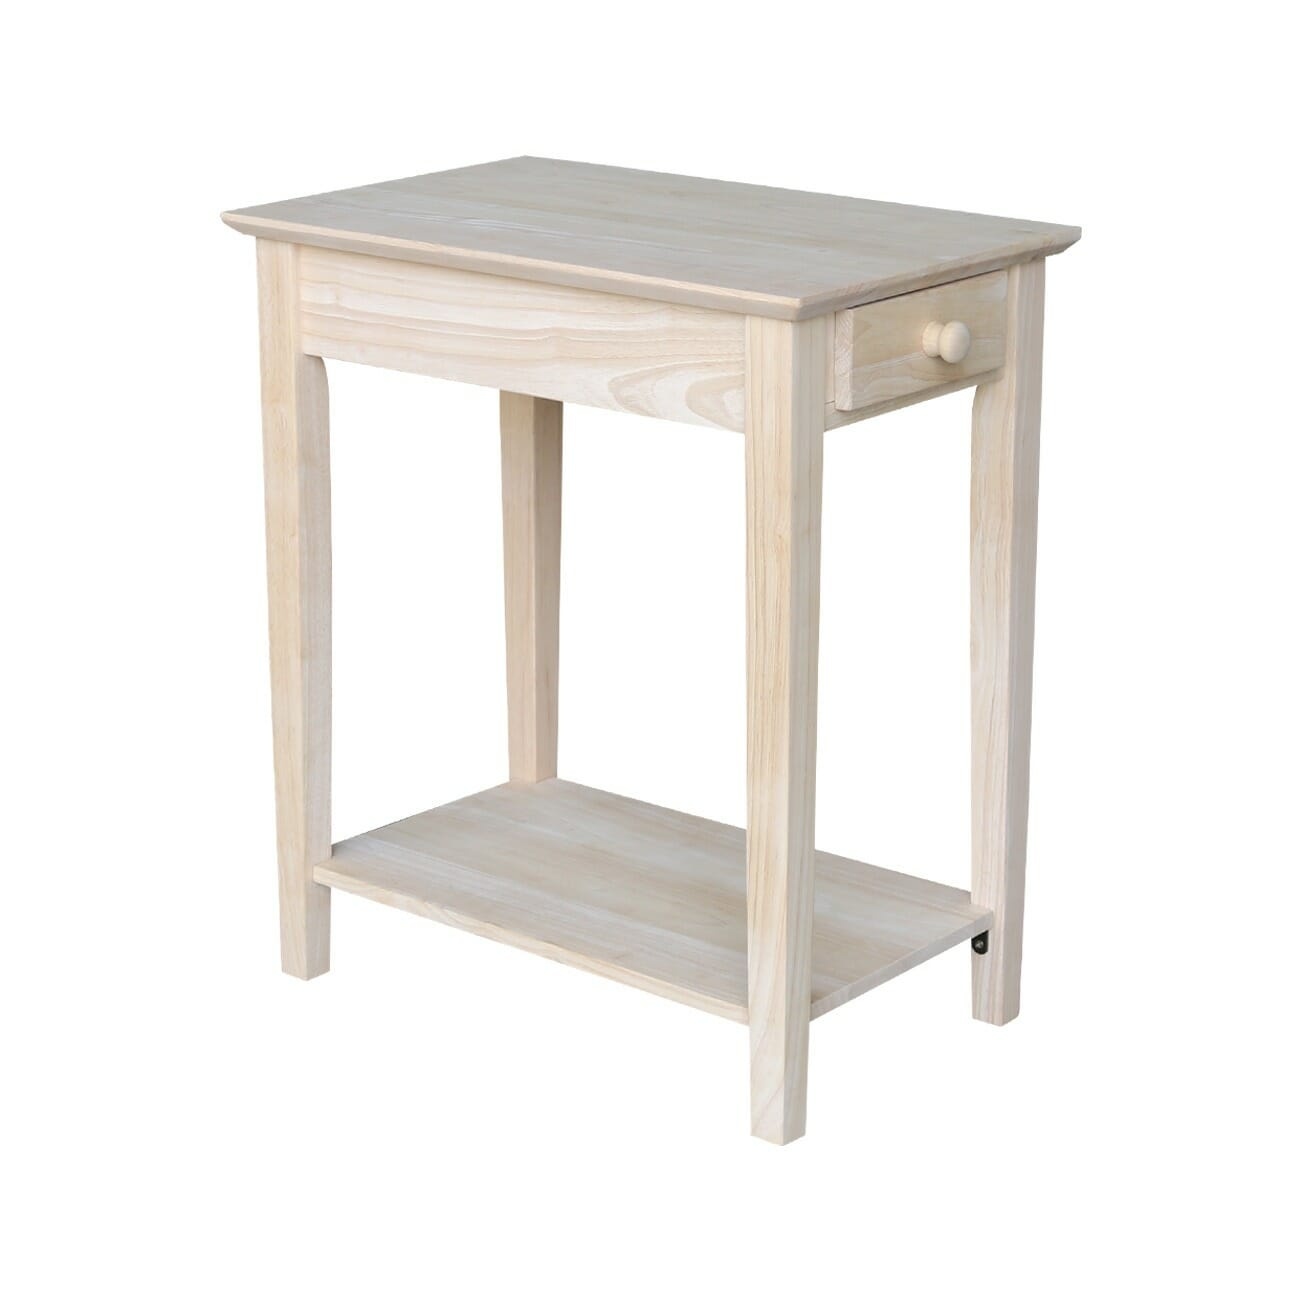 OT-2214 Narrow End Table with Drawer Unfinished ...